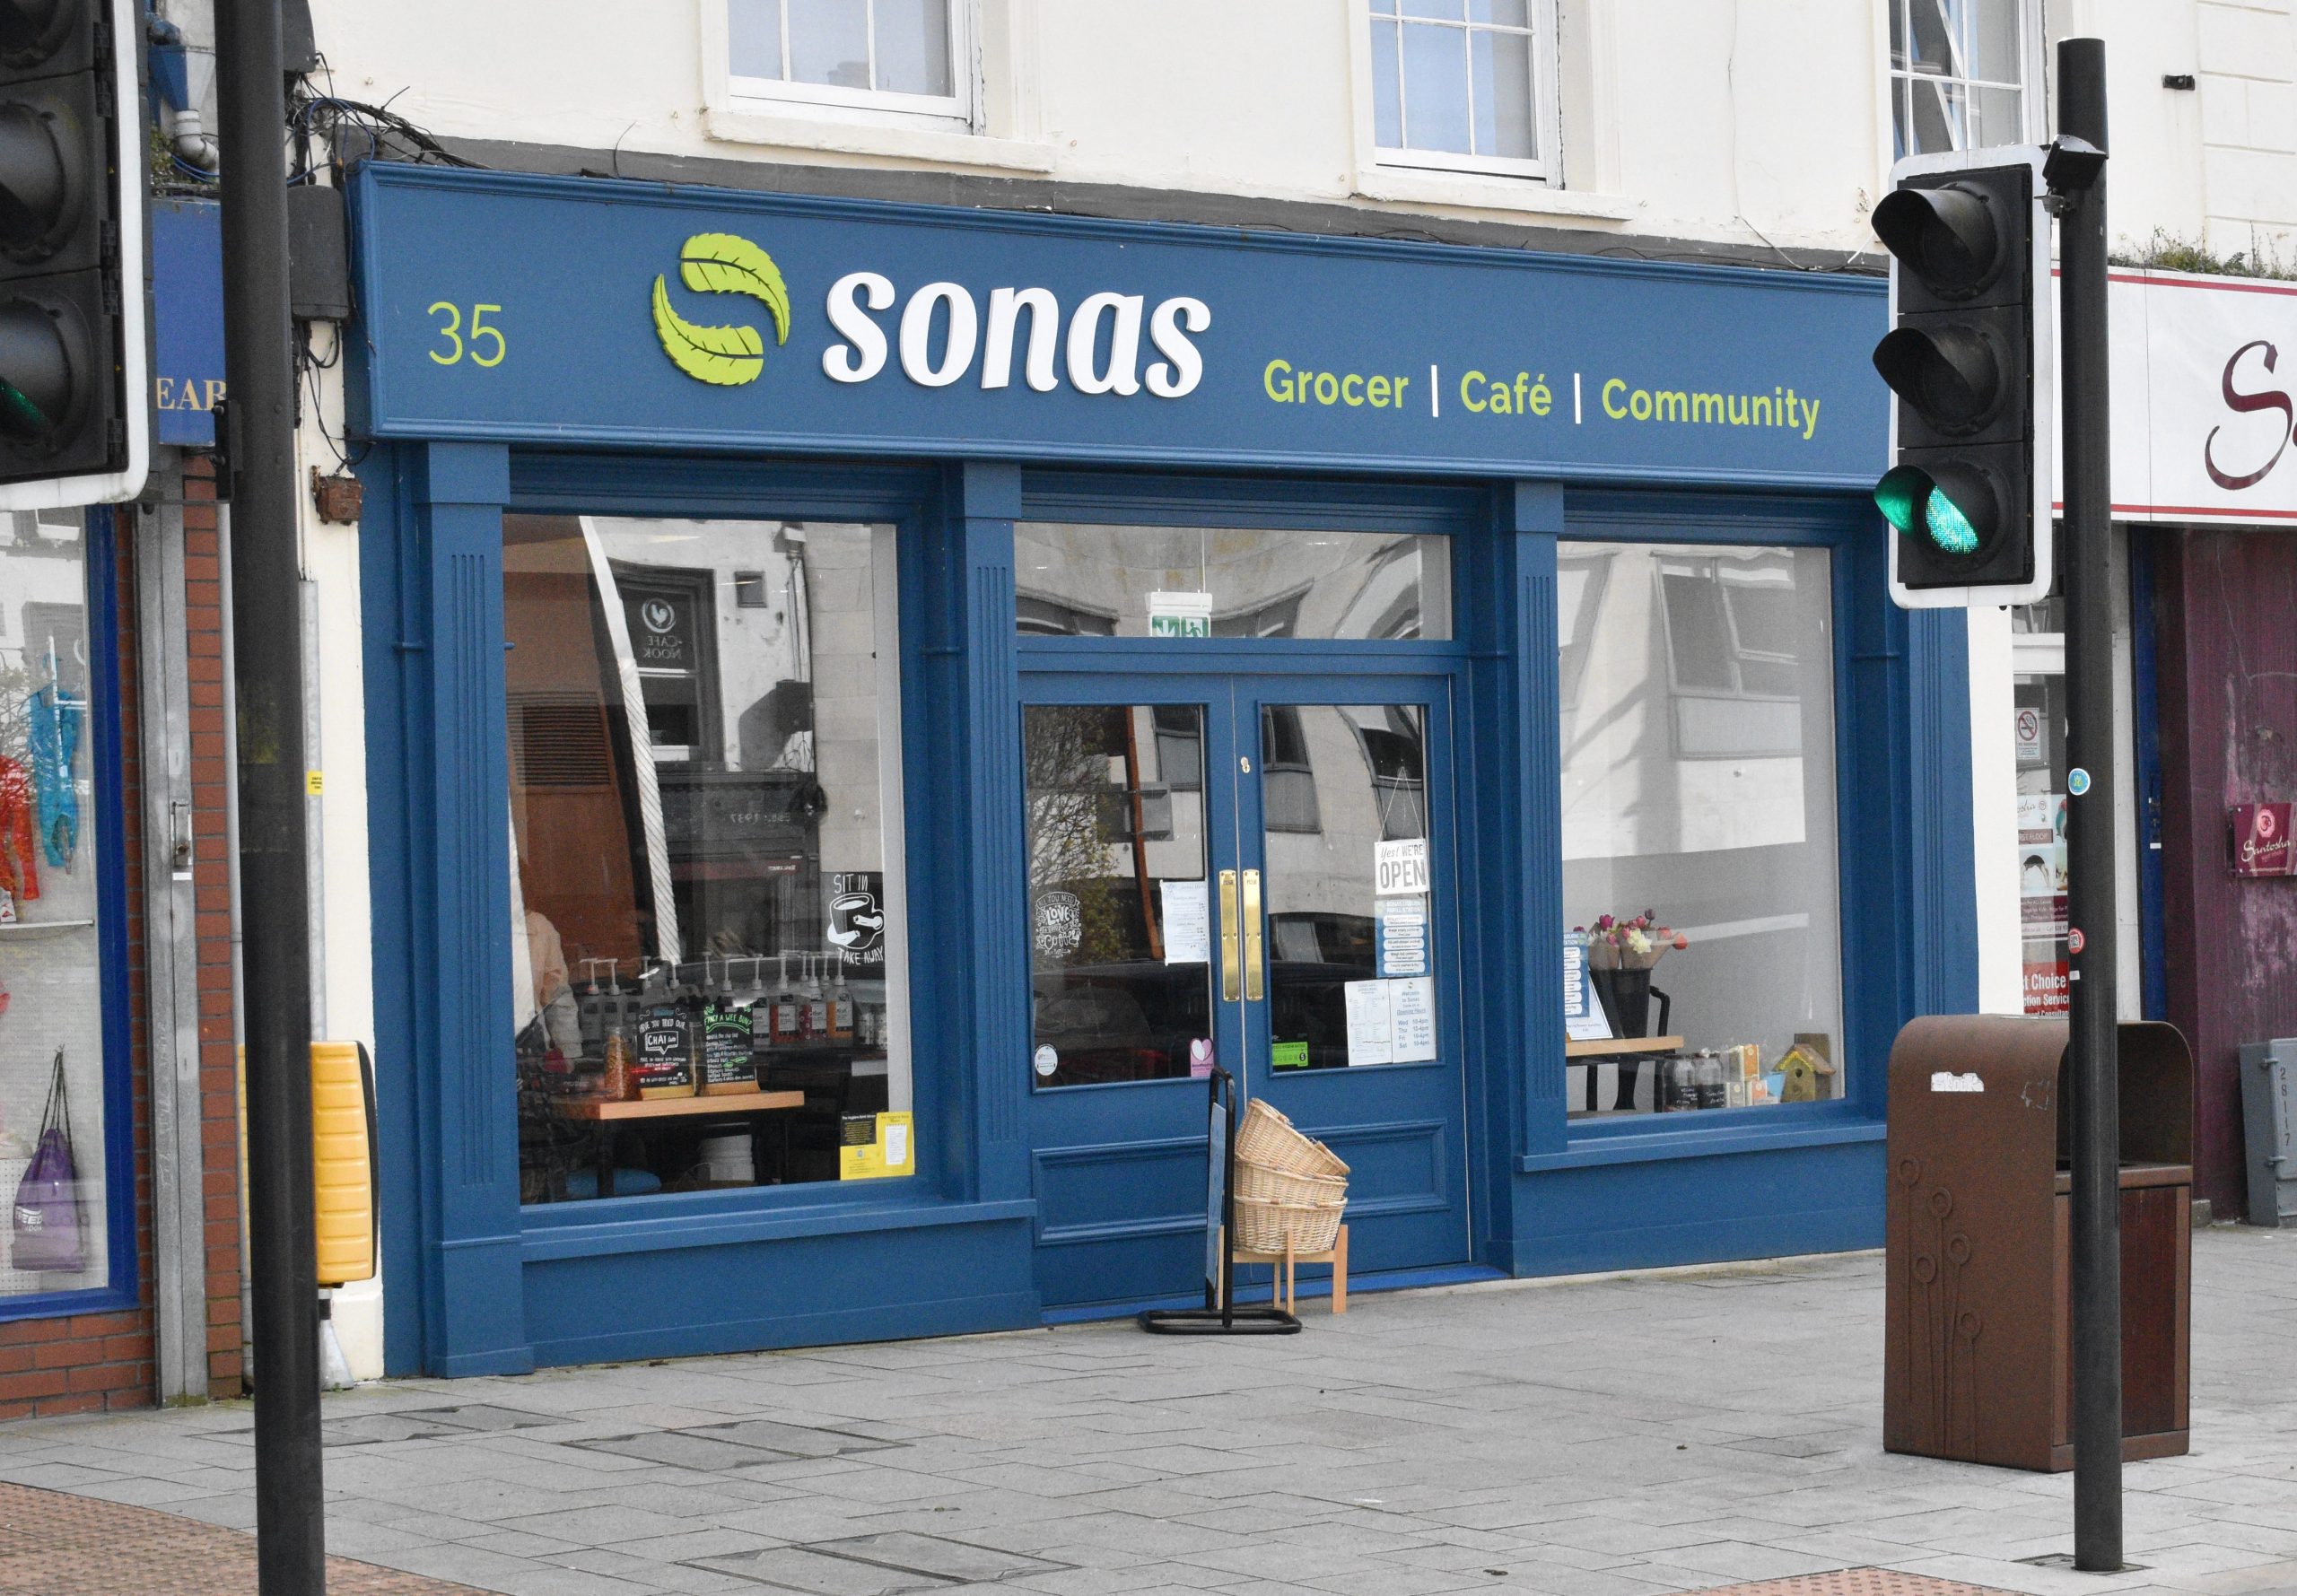 Sonas – the unique grocer offering a special community space